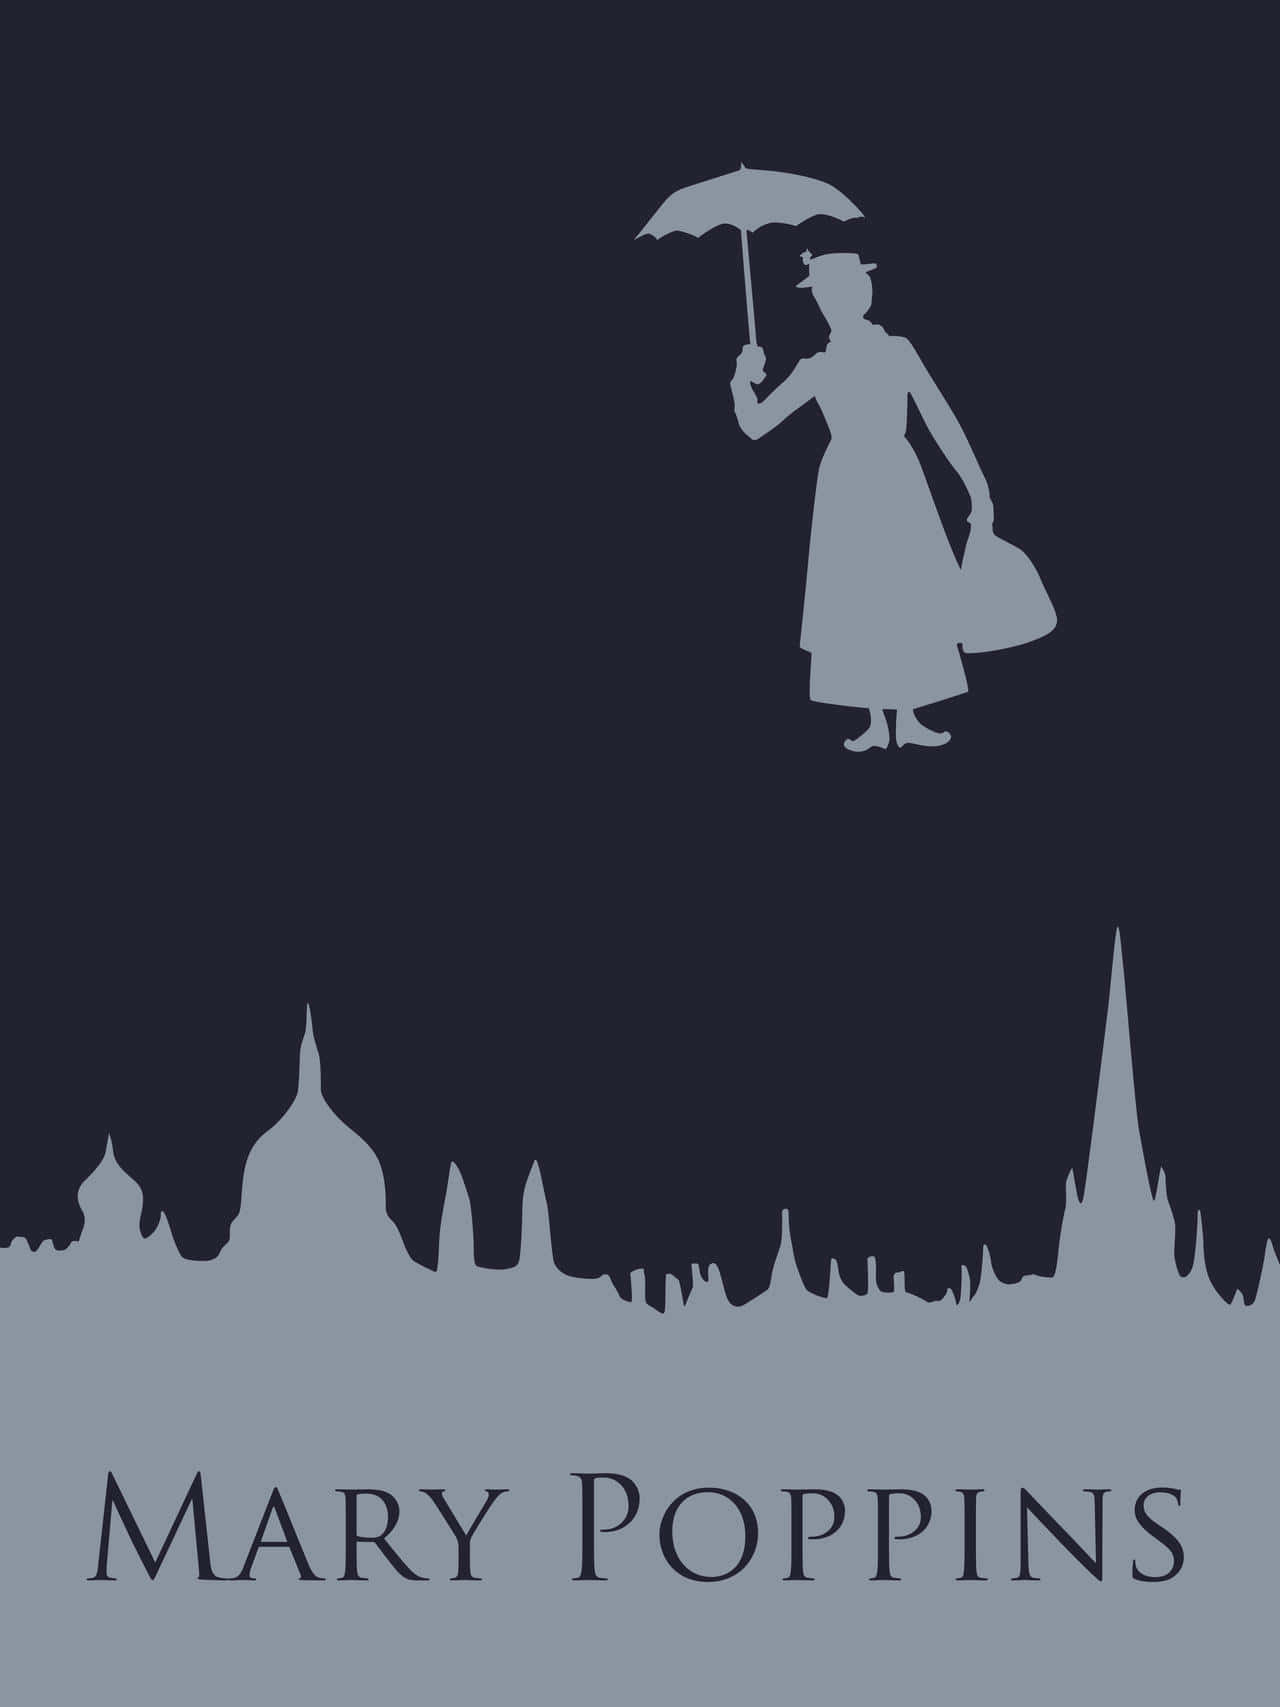 Caption: Mary Poppins Smiling With Her Magical Umbrella Background